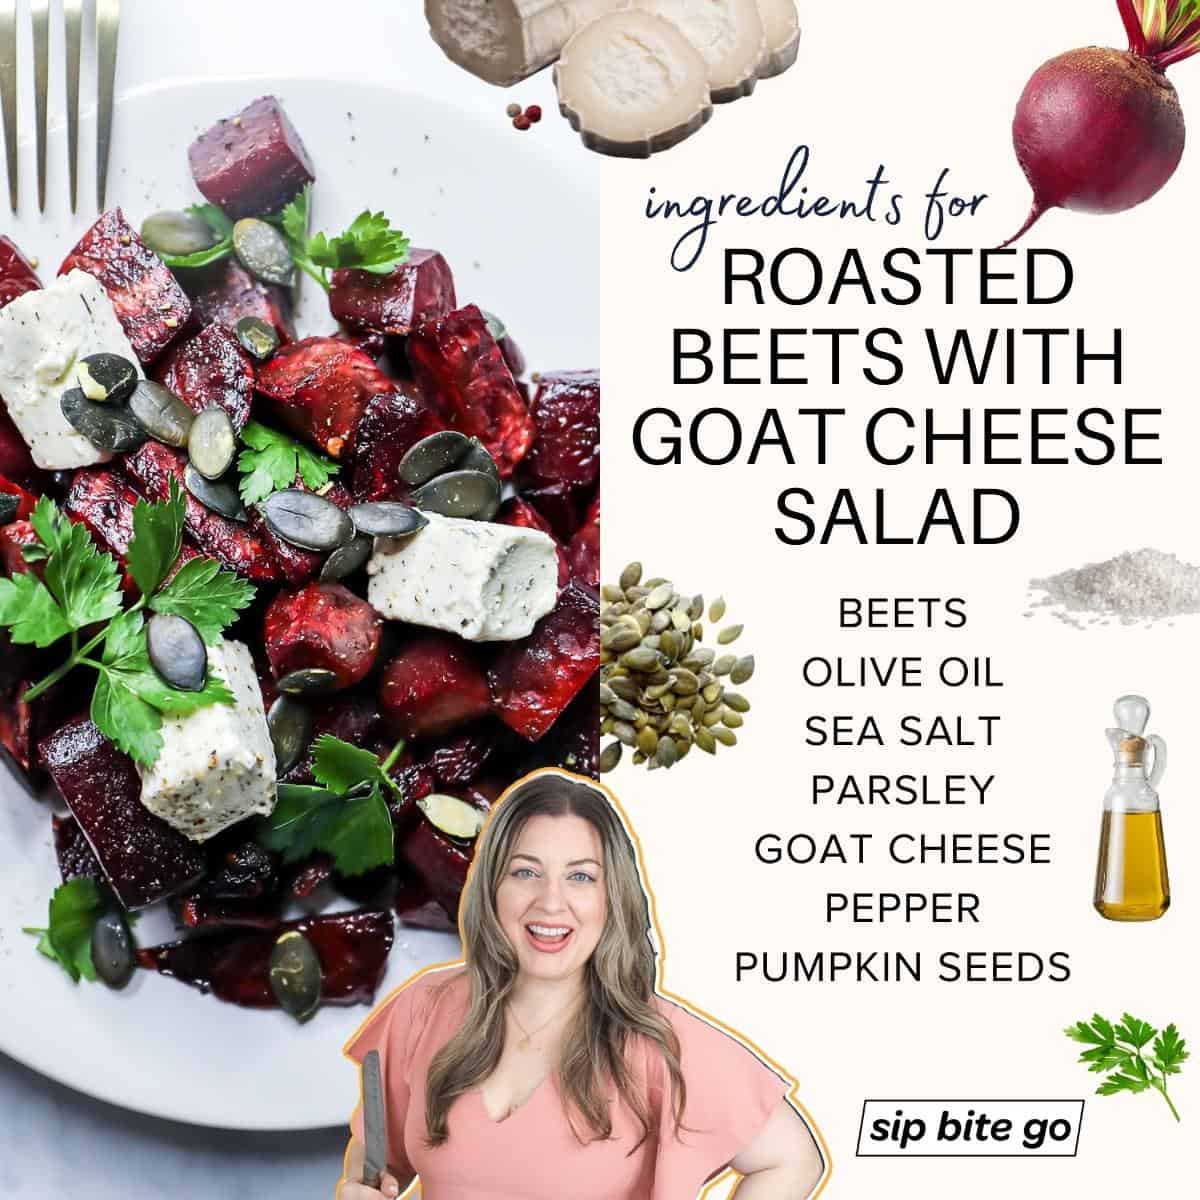 Infographic with ingredients to make Roasted Beets In Oven With Goat Cheese for Salad